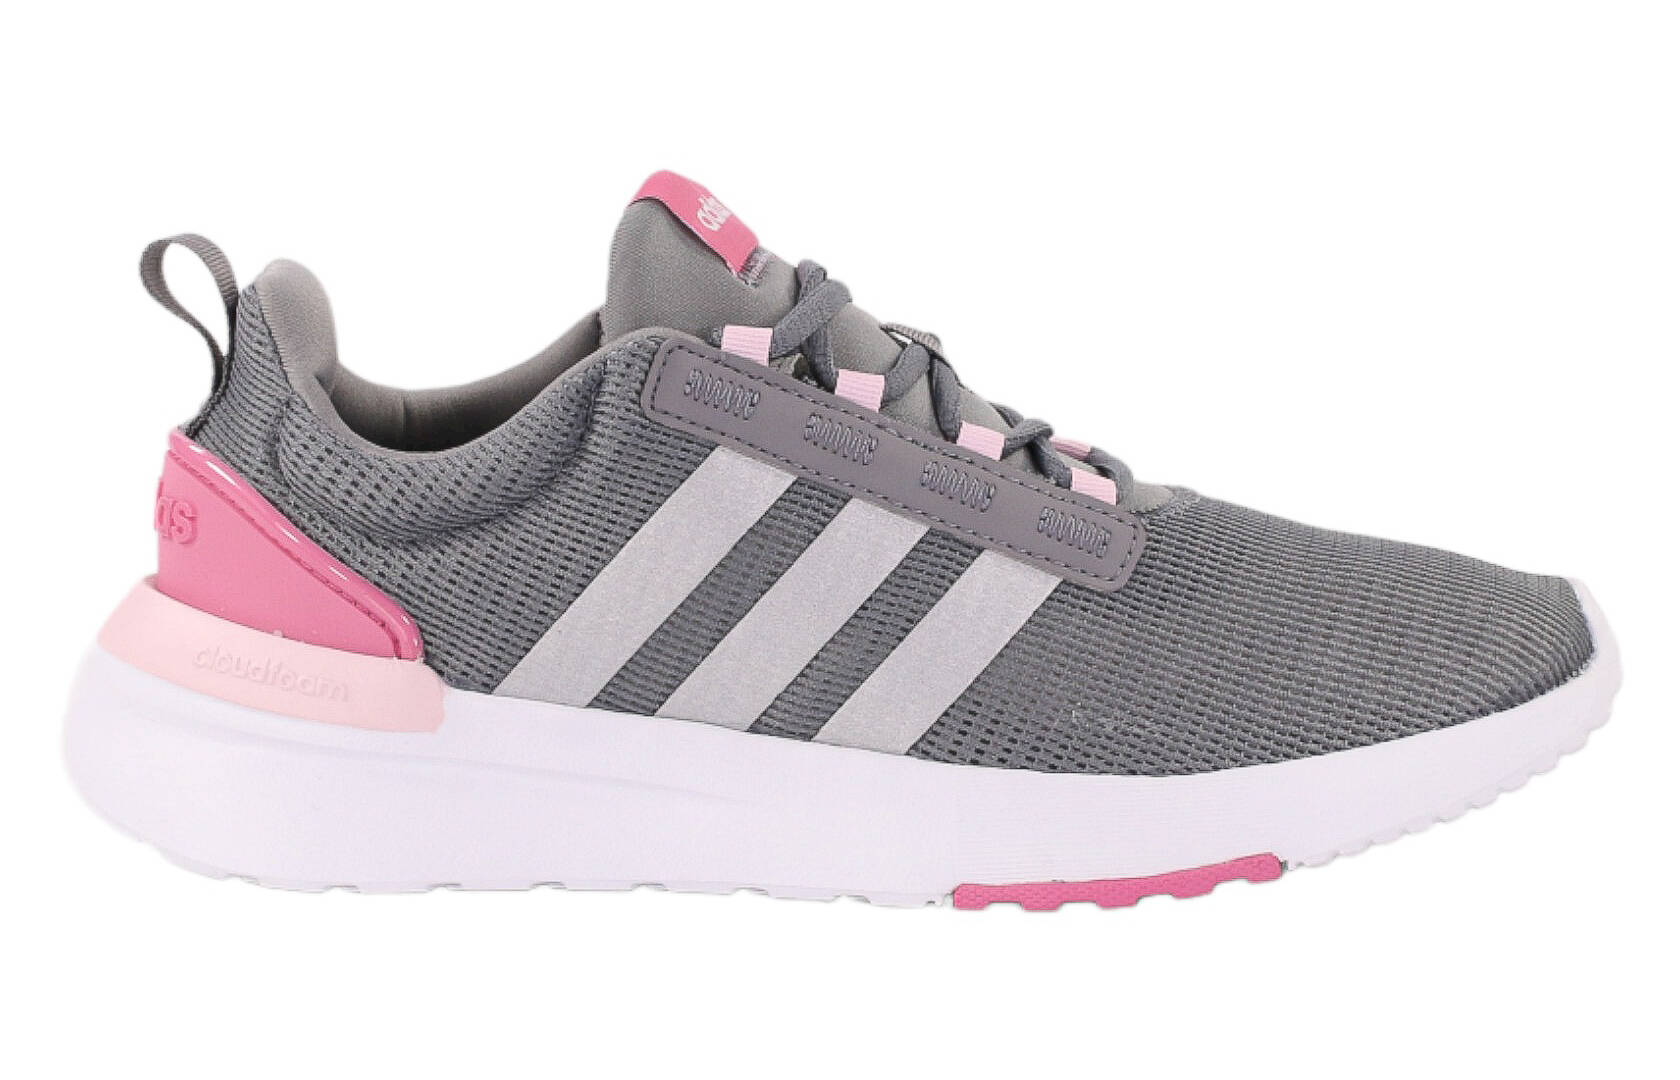 Adidas RACER TR21 K GX3493 youth shoes